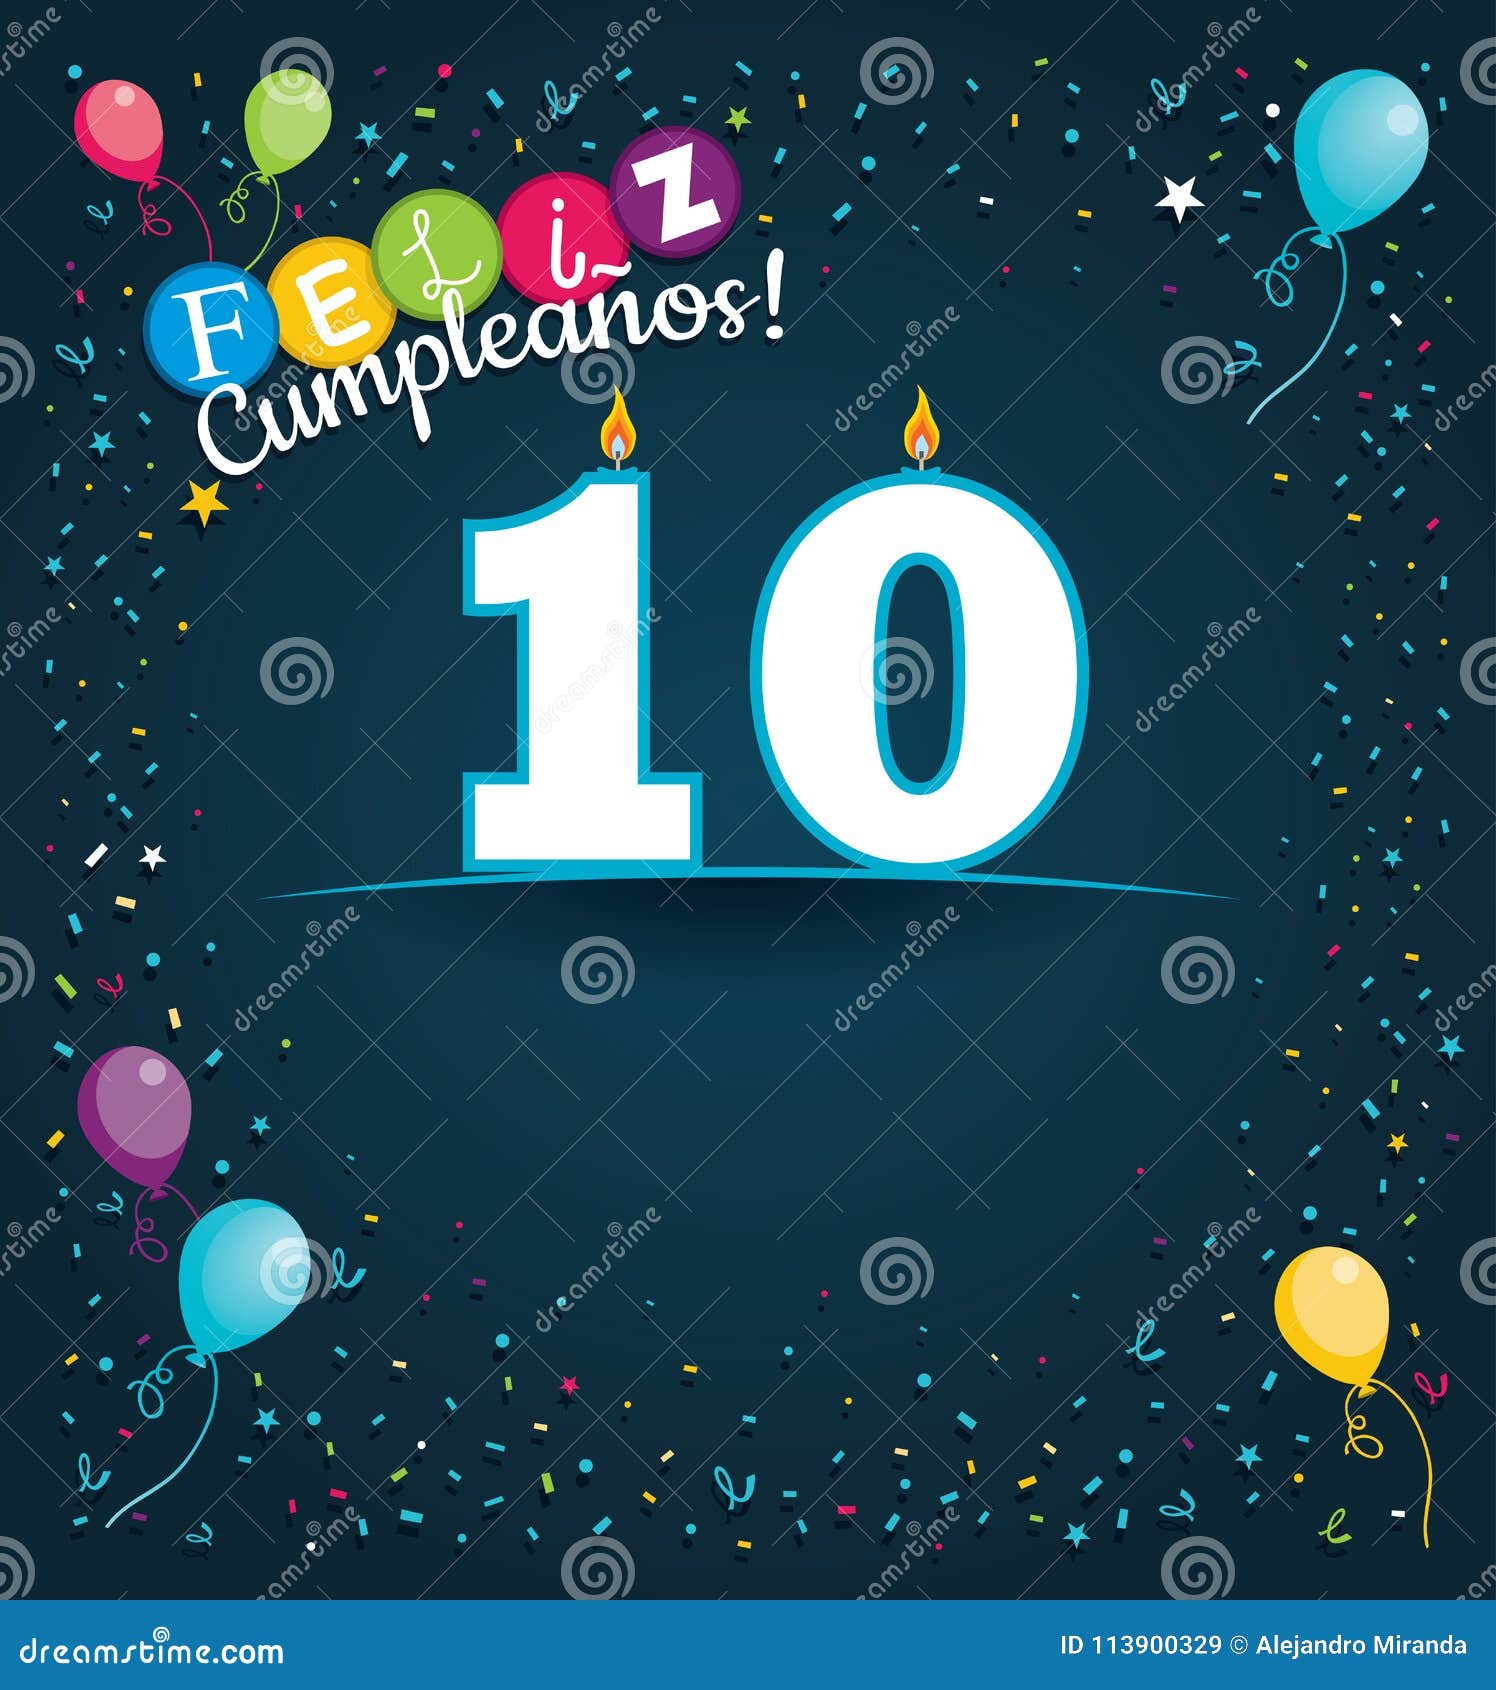 feliz cumpleanos 10 - happy birthday 10 in spanish language - greeting card with white candles